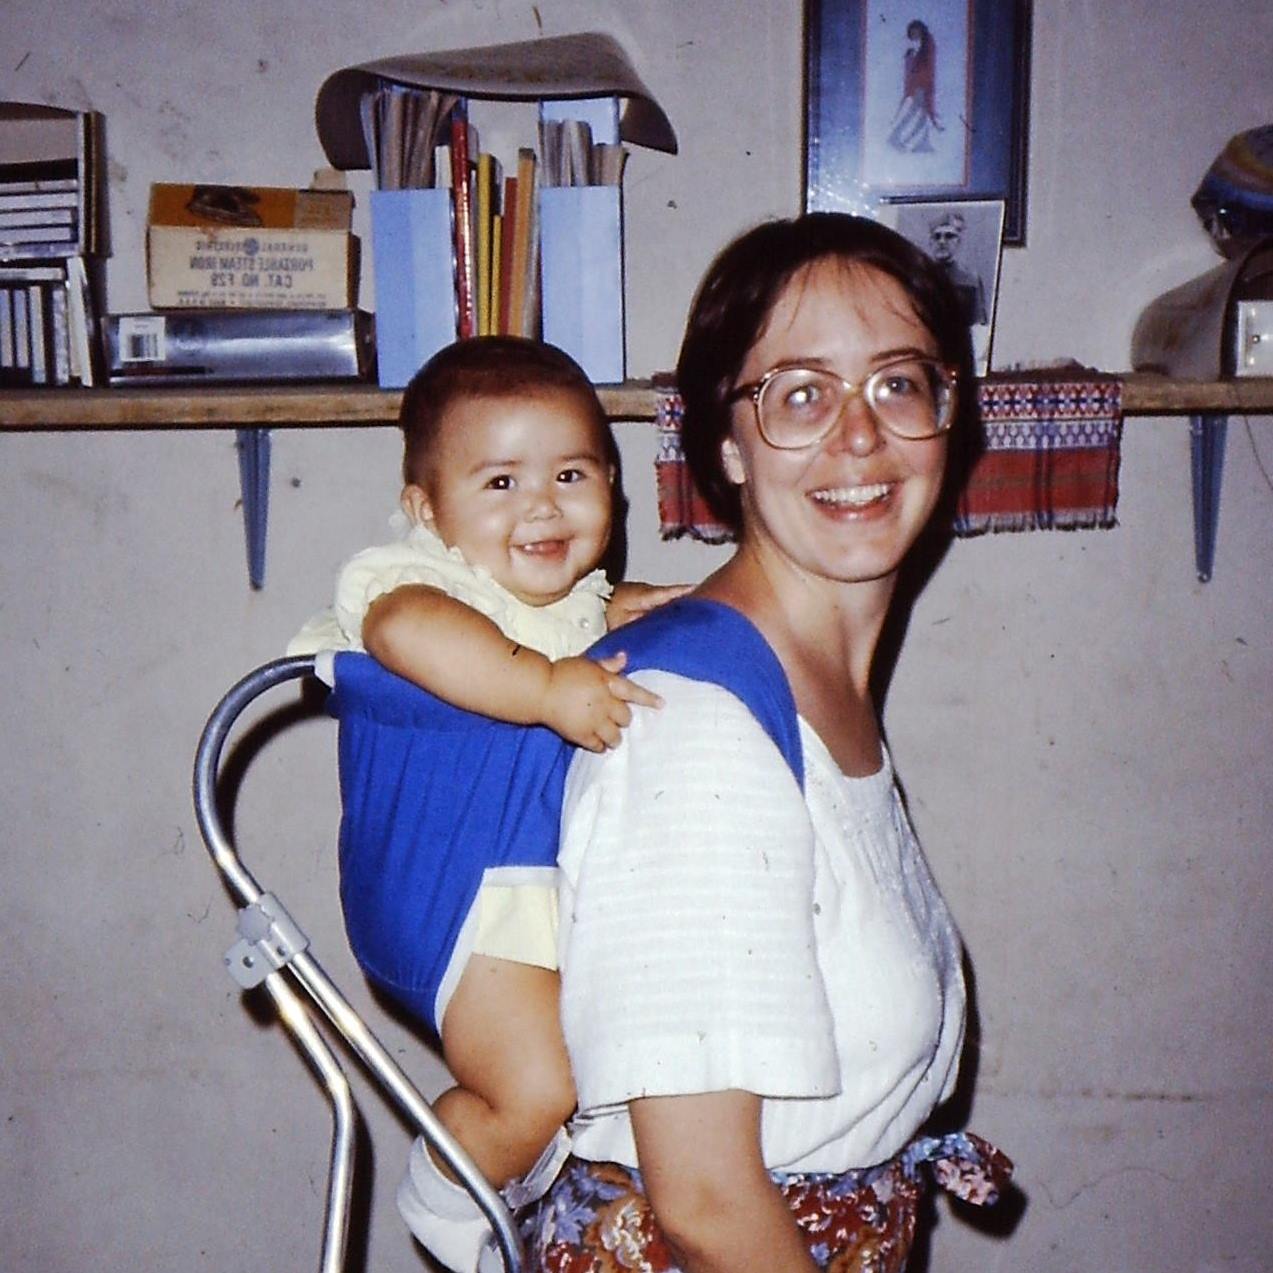 My daughter, Luz, in her Gerry carrier in our home in El Salvador. That was our mode of transportation then — walking and riding buses and in the back of pick-up trucks. Martyred Archbishop Romero is in a photo on the shelf behind us.